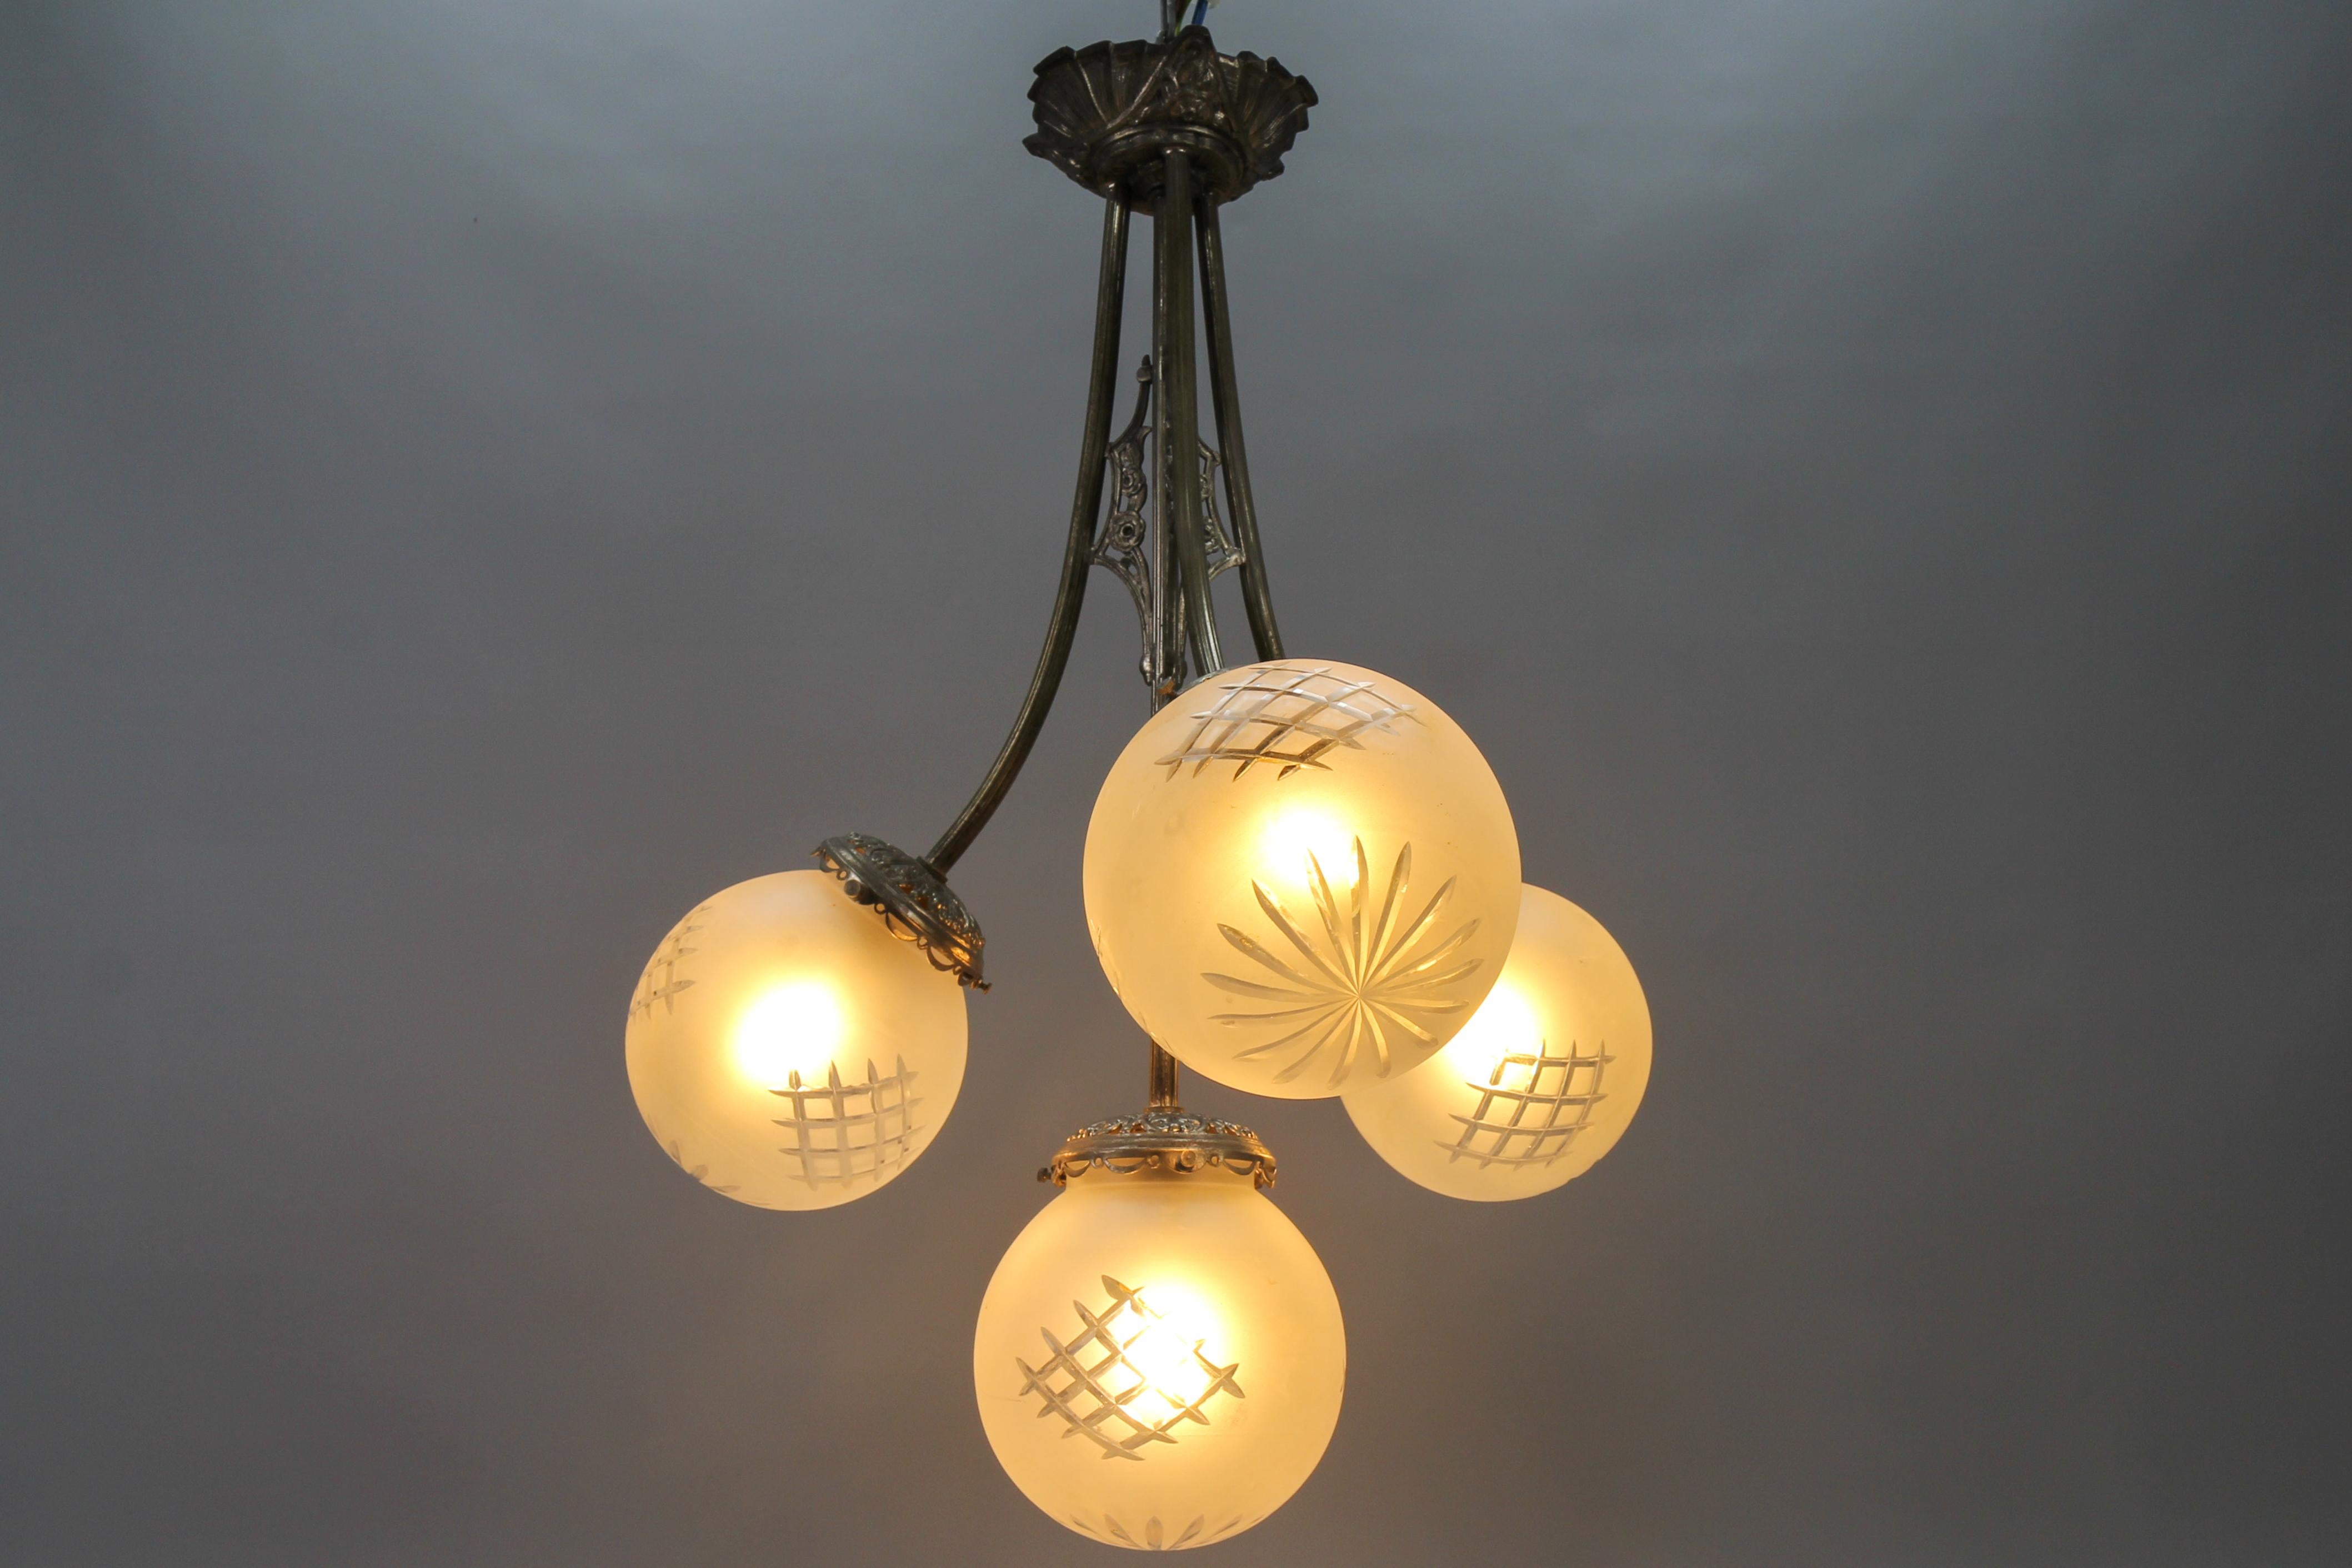 Mid-20th Century French Art Deco Four-Light Brass and Frosted Cut Glass Globes Pendant Chandelier For Sale